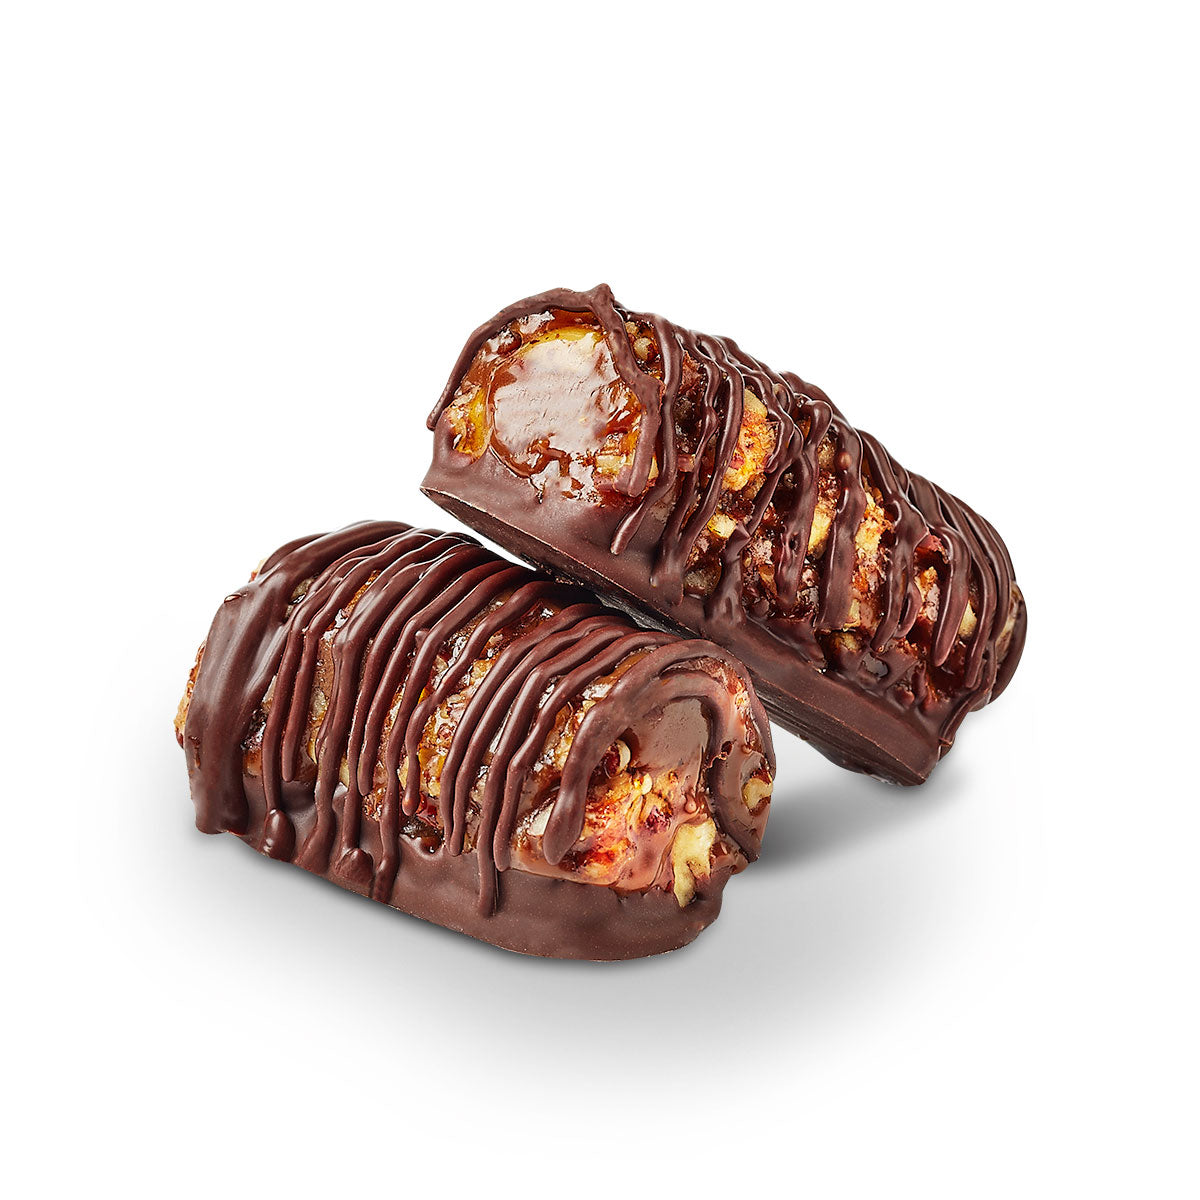 Peccanroll Caramel Crunch Toffee Rolls - Pecan-Encrusted, Chocolate-Smothered Delight | 45% Pure Cacao and Gluten Free